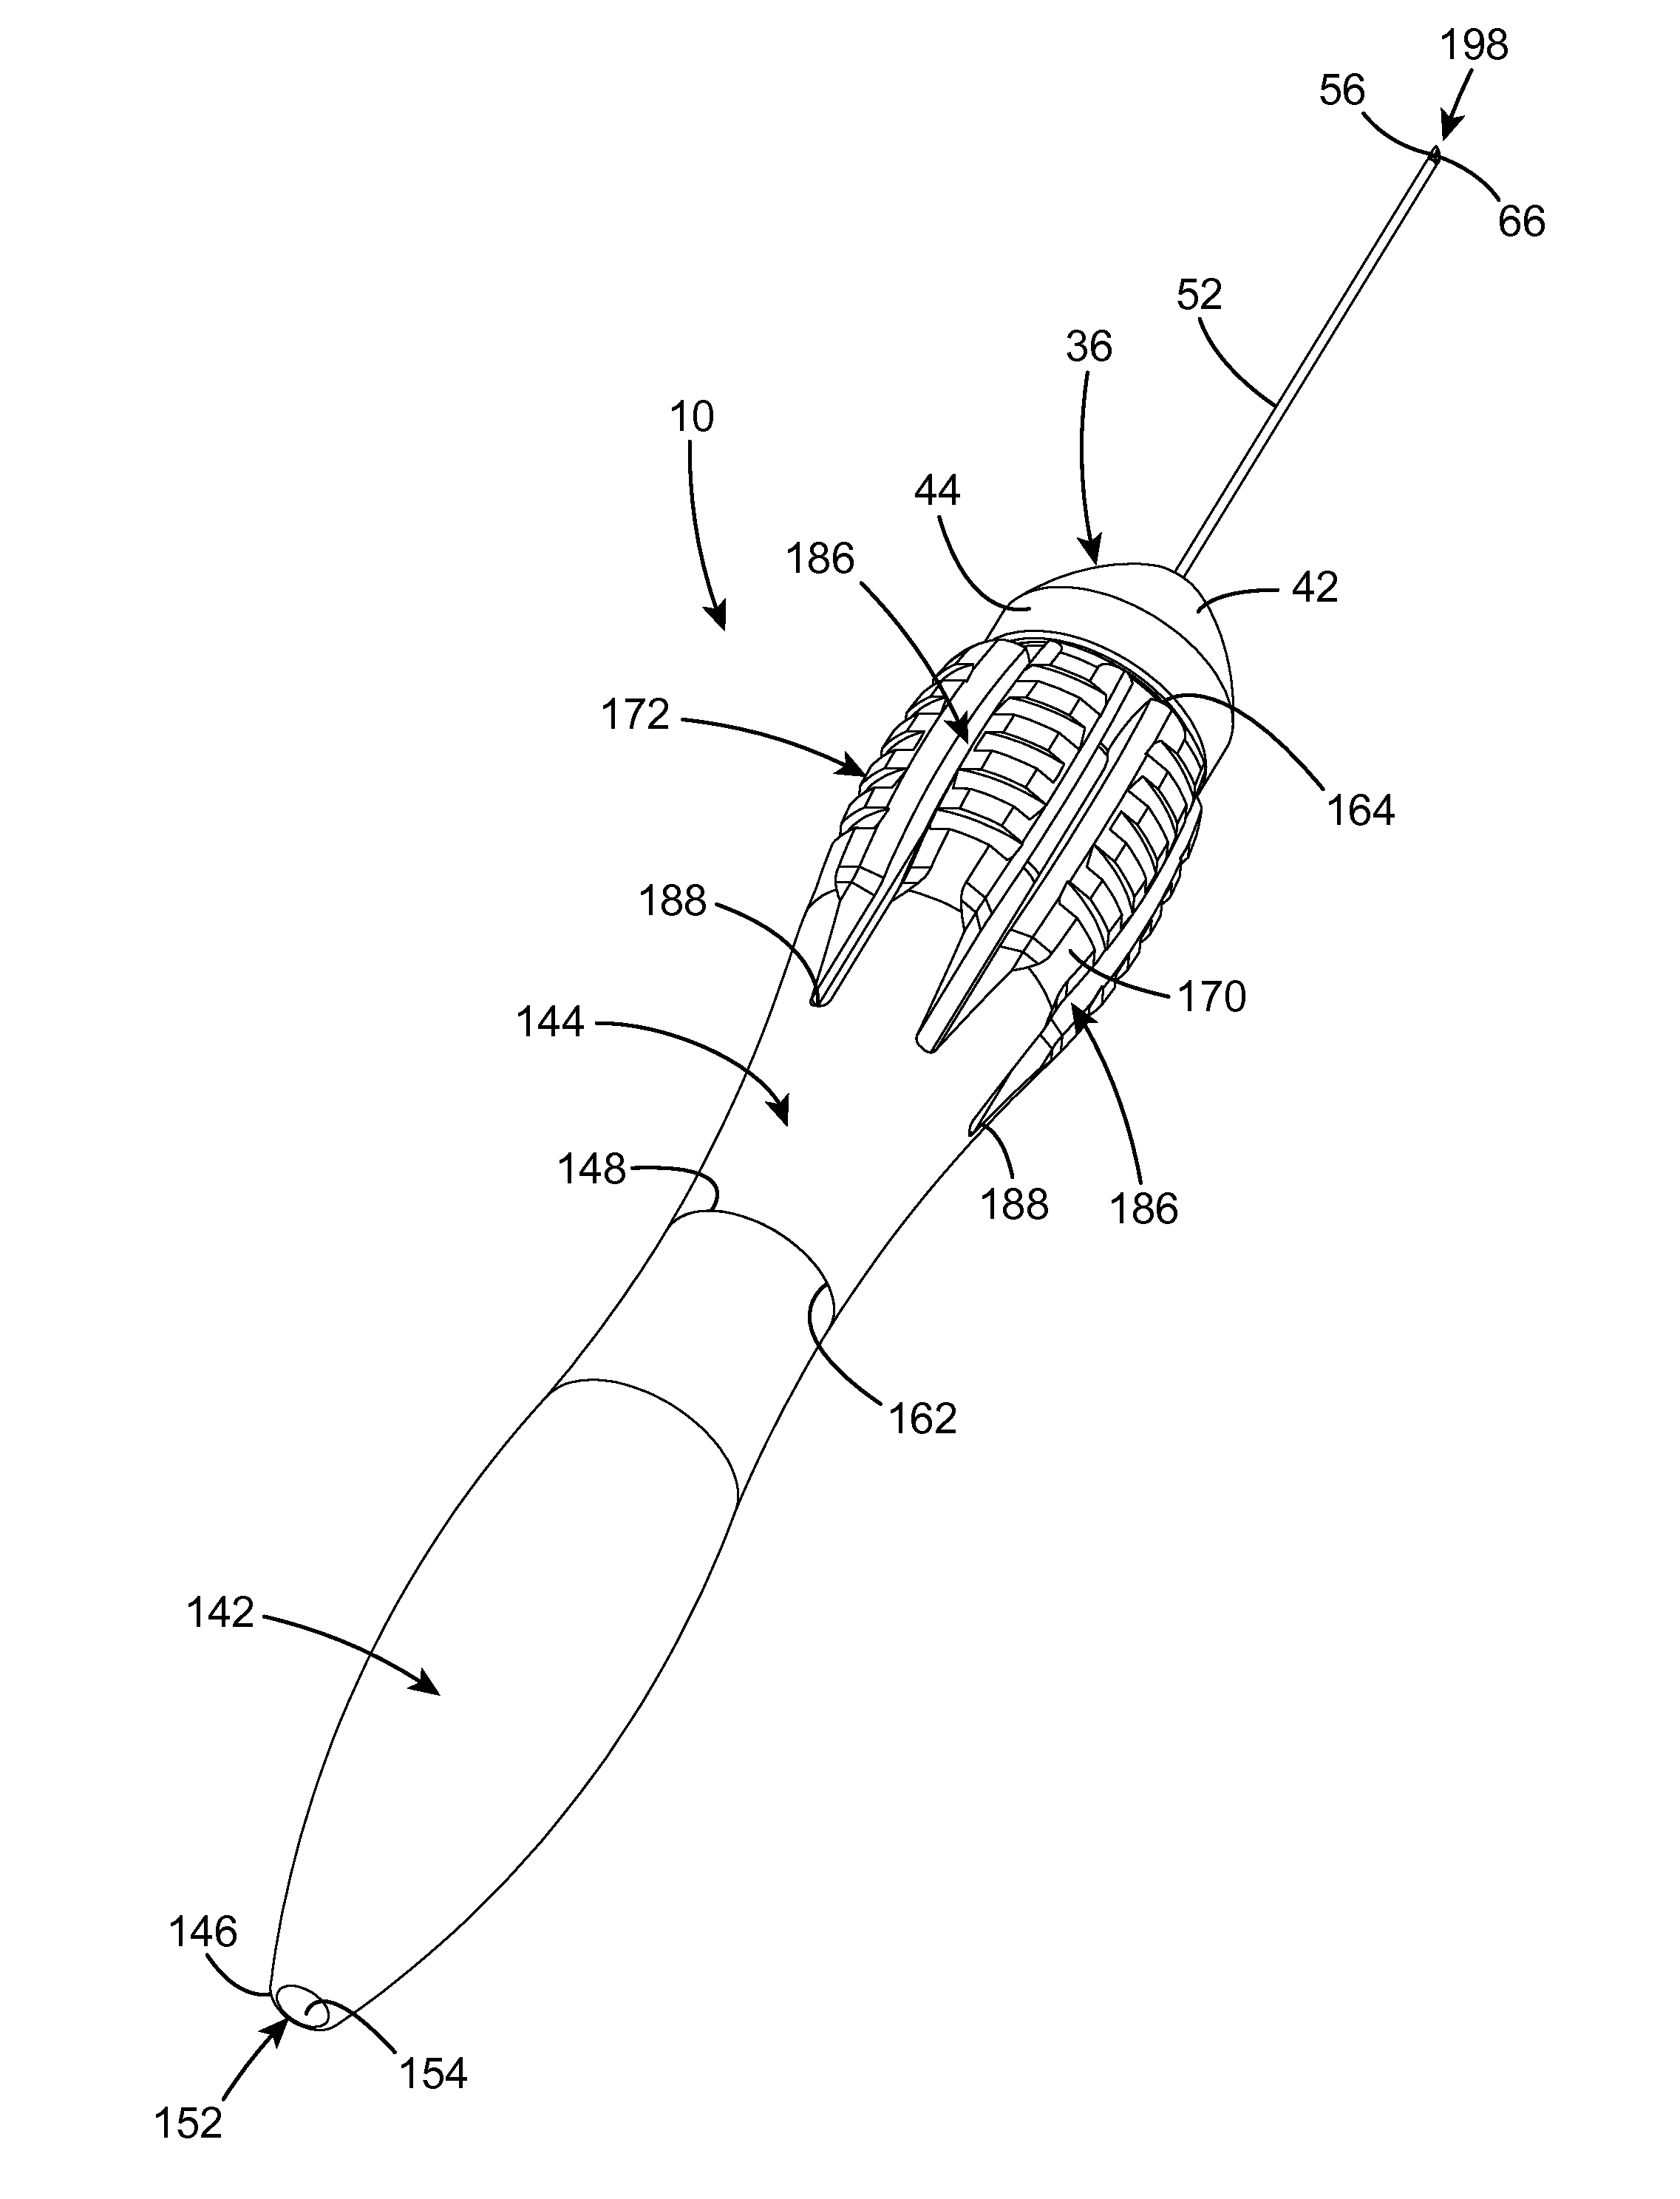 Axially Reciprocating Microsurgical Instrument with Radially Compressed Actuator Handle